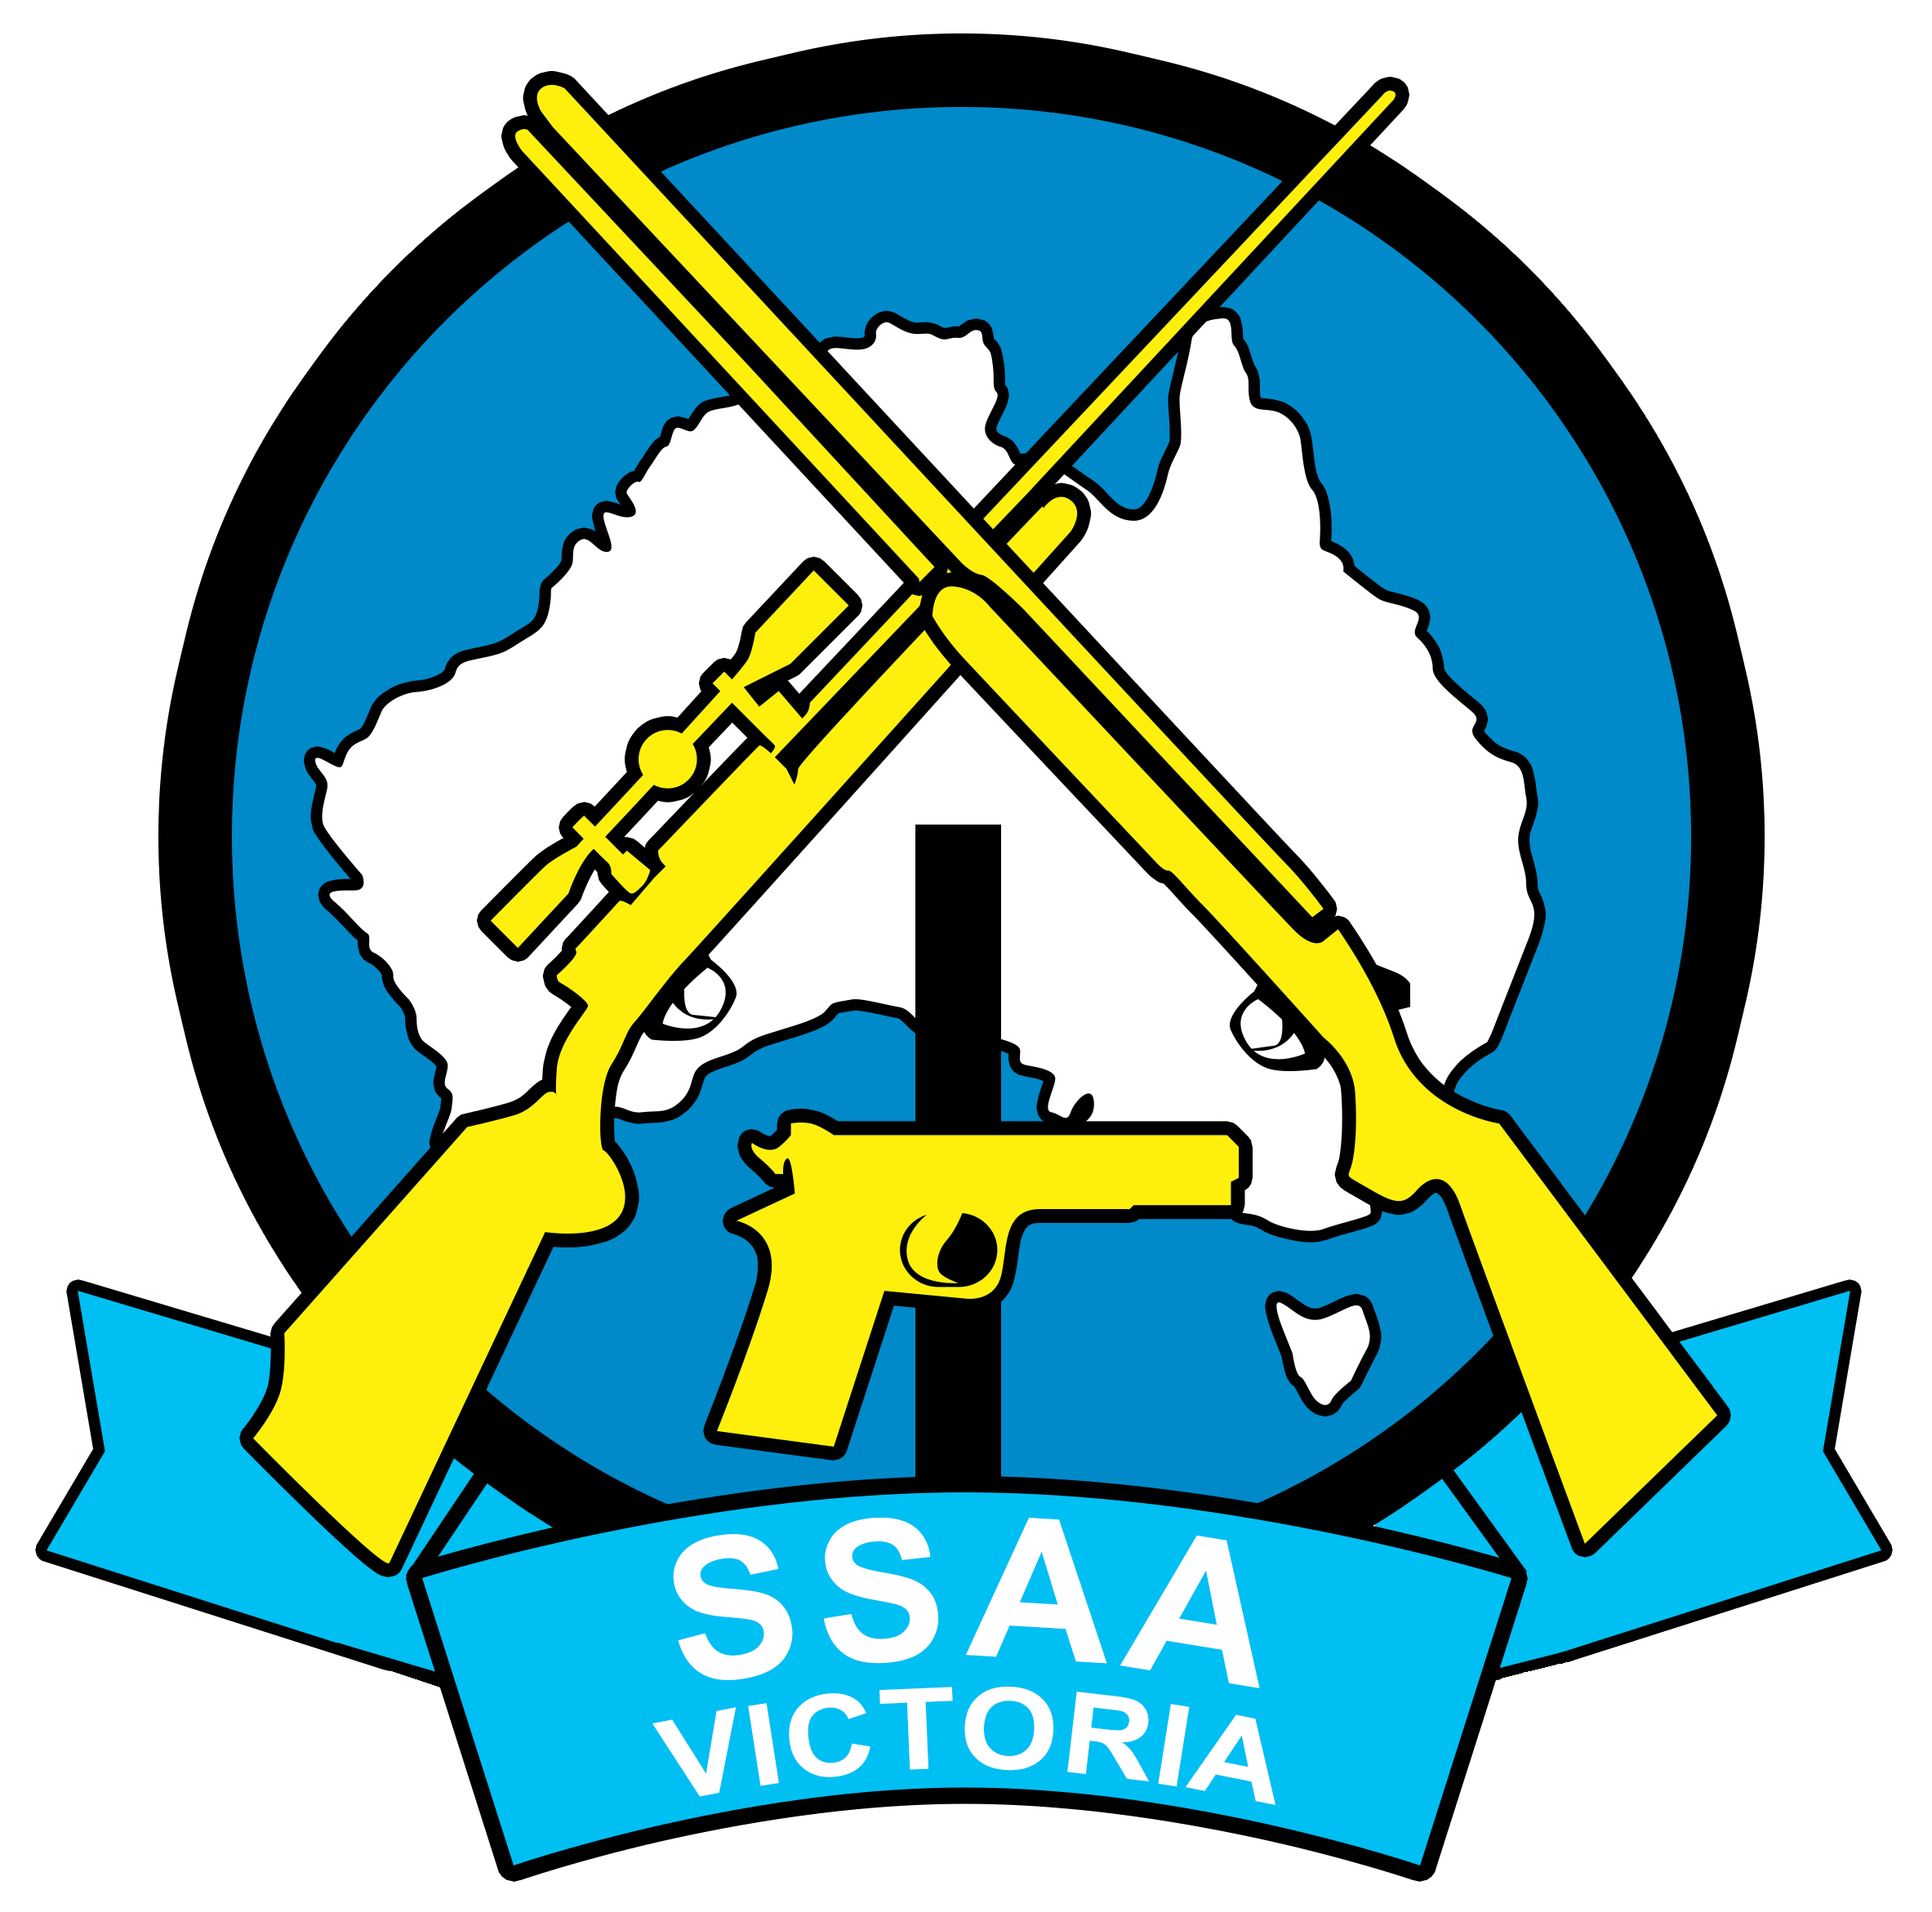 Sporting Shooters Association of Australia (Victoria)